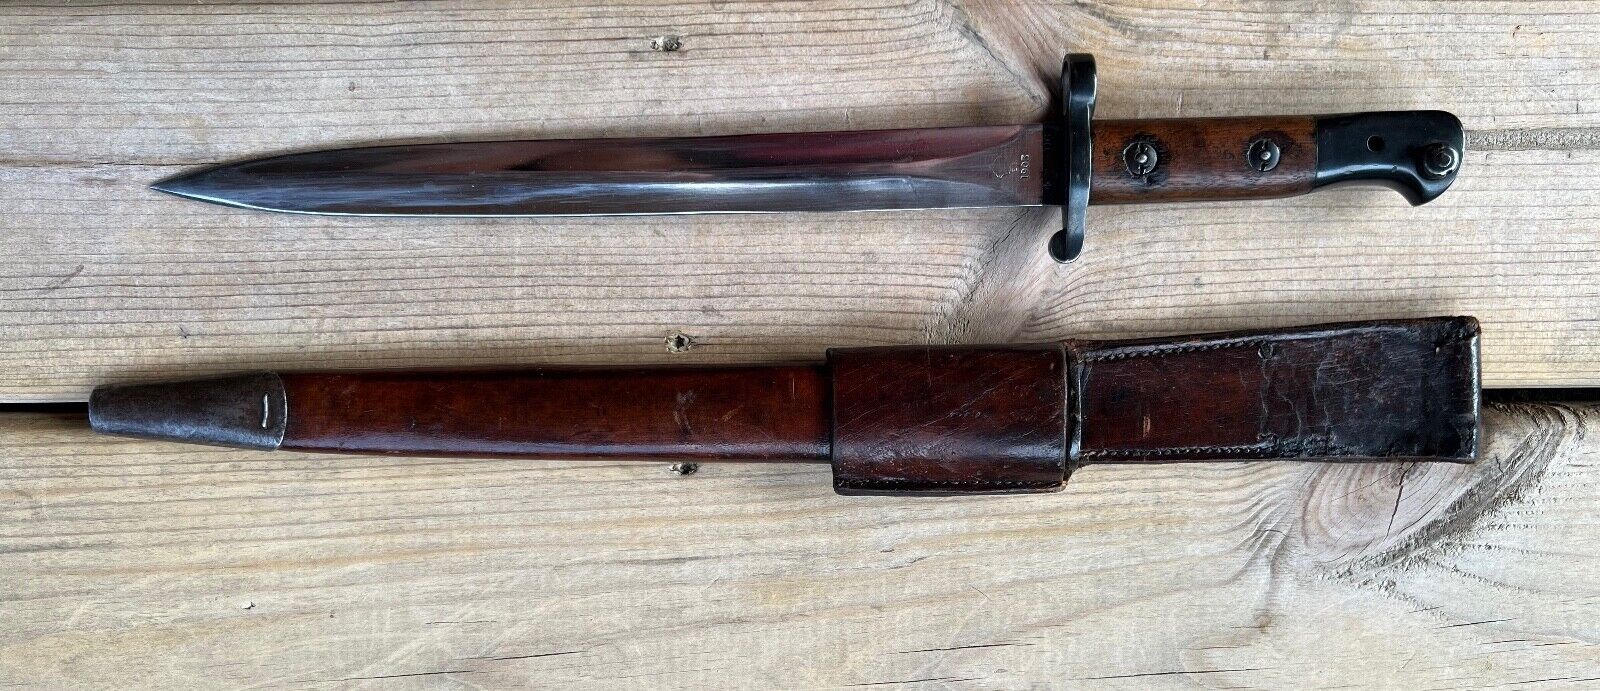 Pre-WWI British Enfield P1903 Bayonet & Scabbard Unit Marked Yorkshire Light Inf